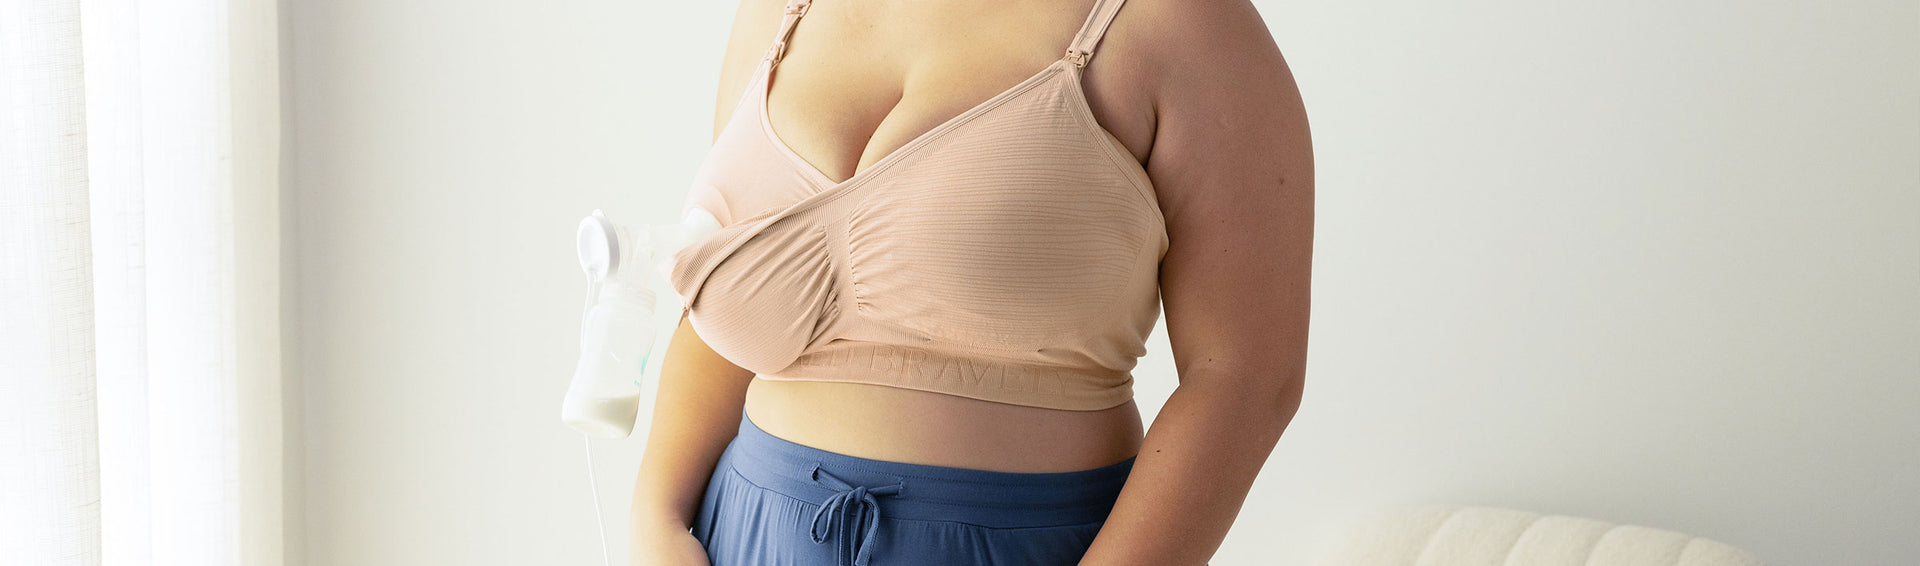 25 Of The Best Nursing Bras For Small And Big Chested Women » Read